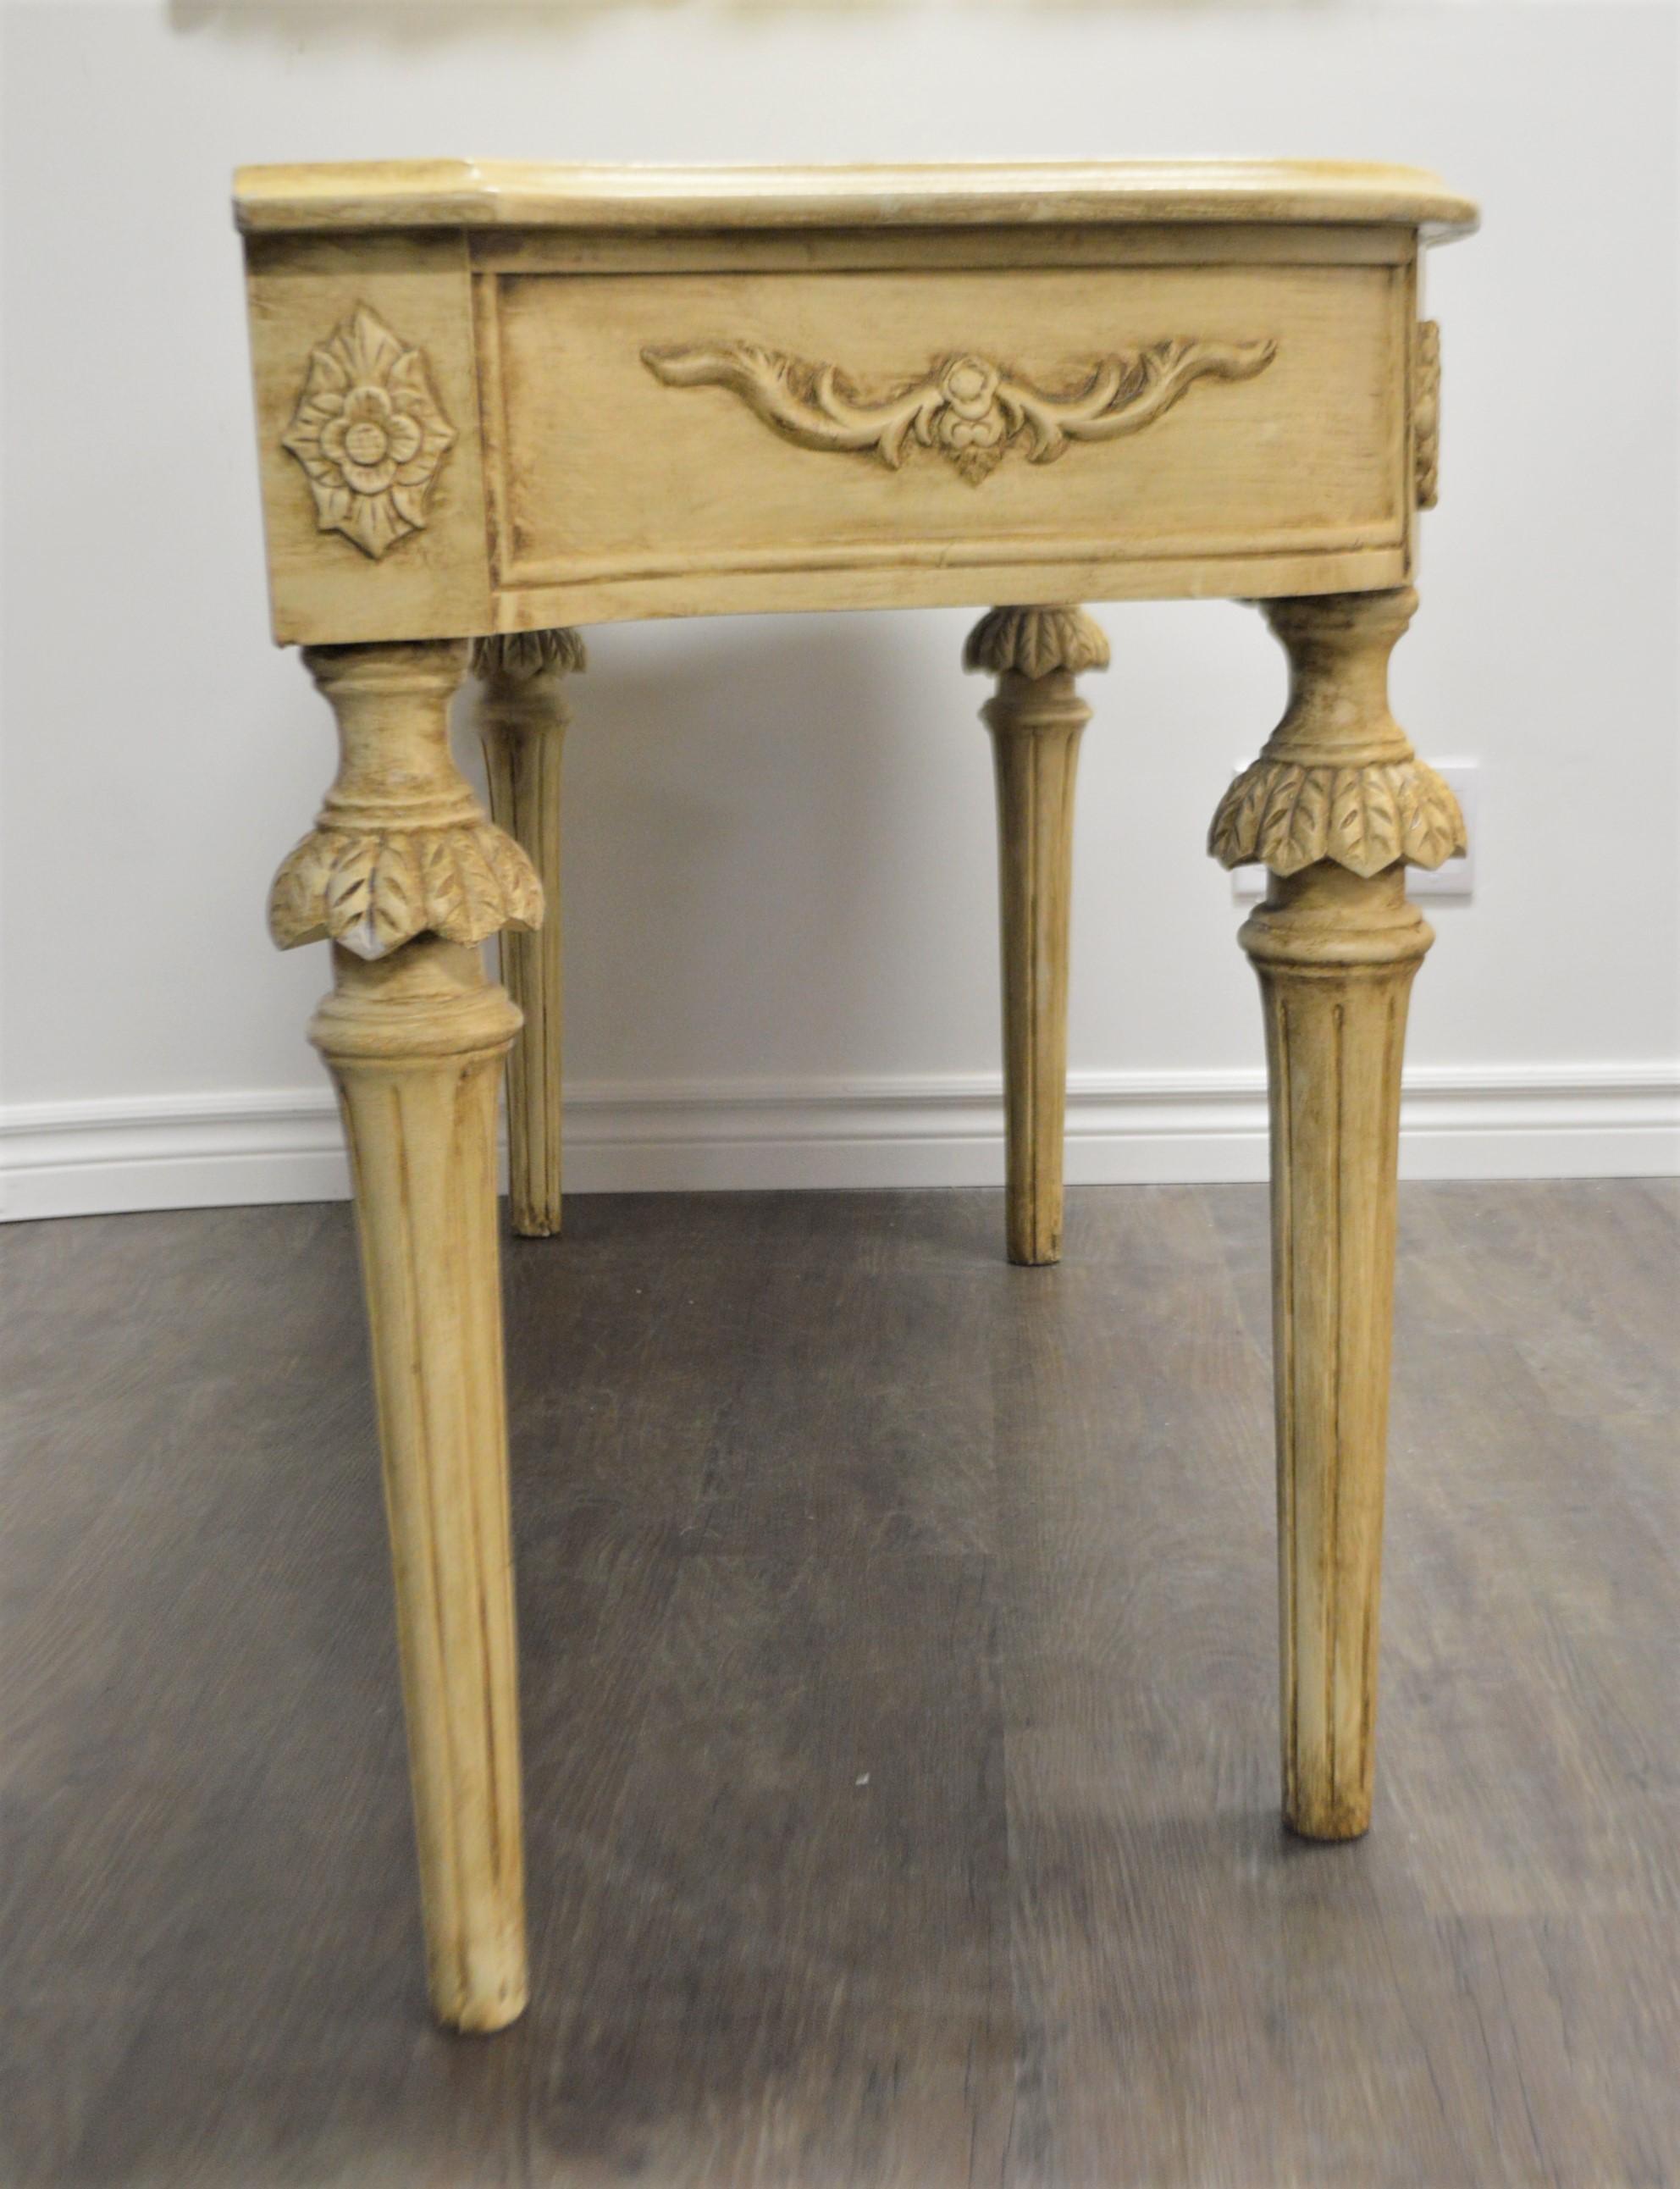 Gustavian wooden console table, sofa table painted in a light gold tone with attractive carved details at the apron and at the top of the fluted legs.
Would also make a practical library table. Measures: width 59 1/2